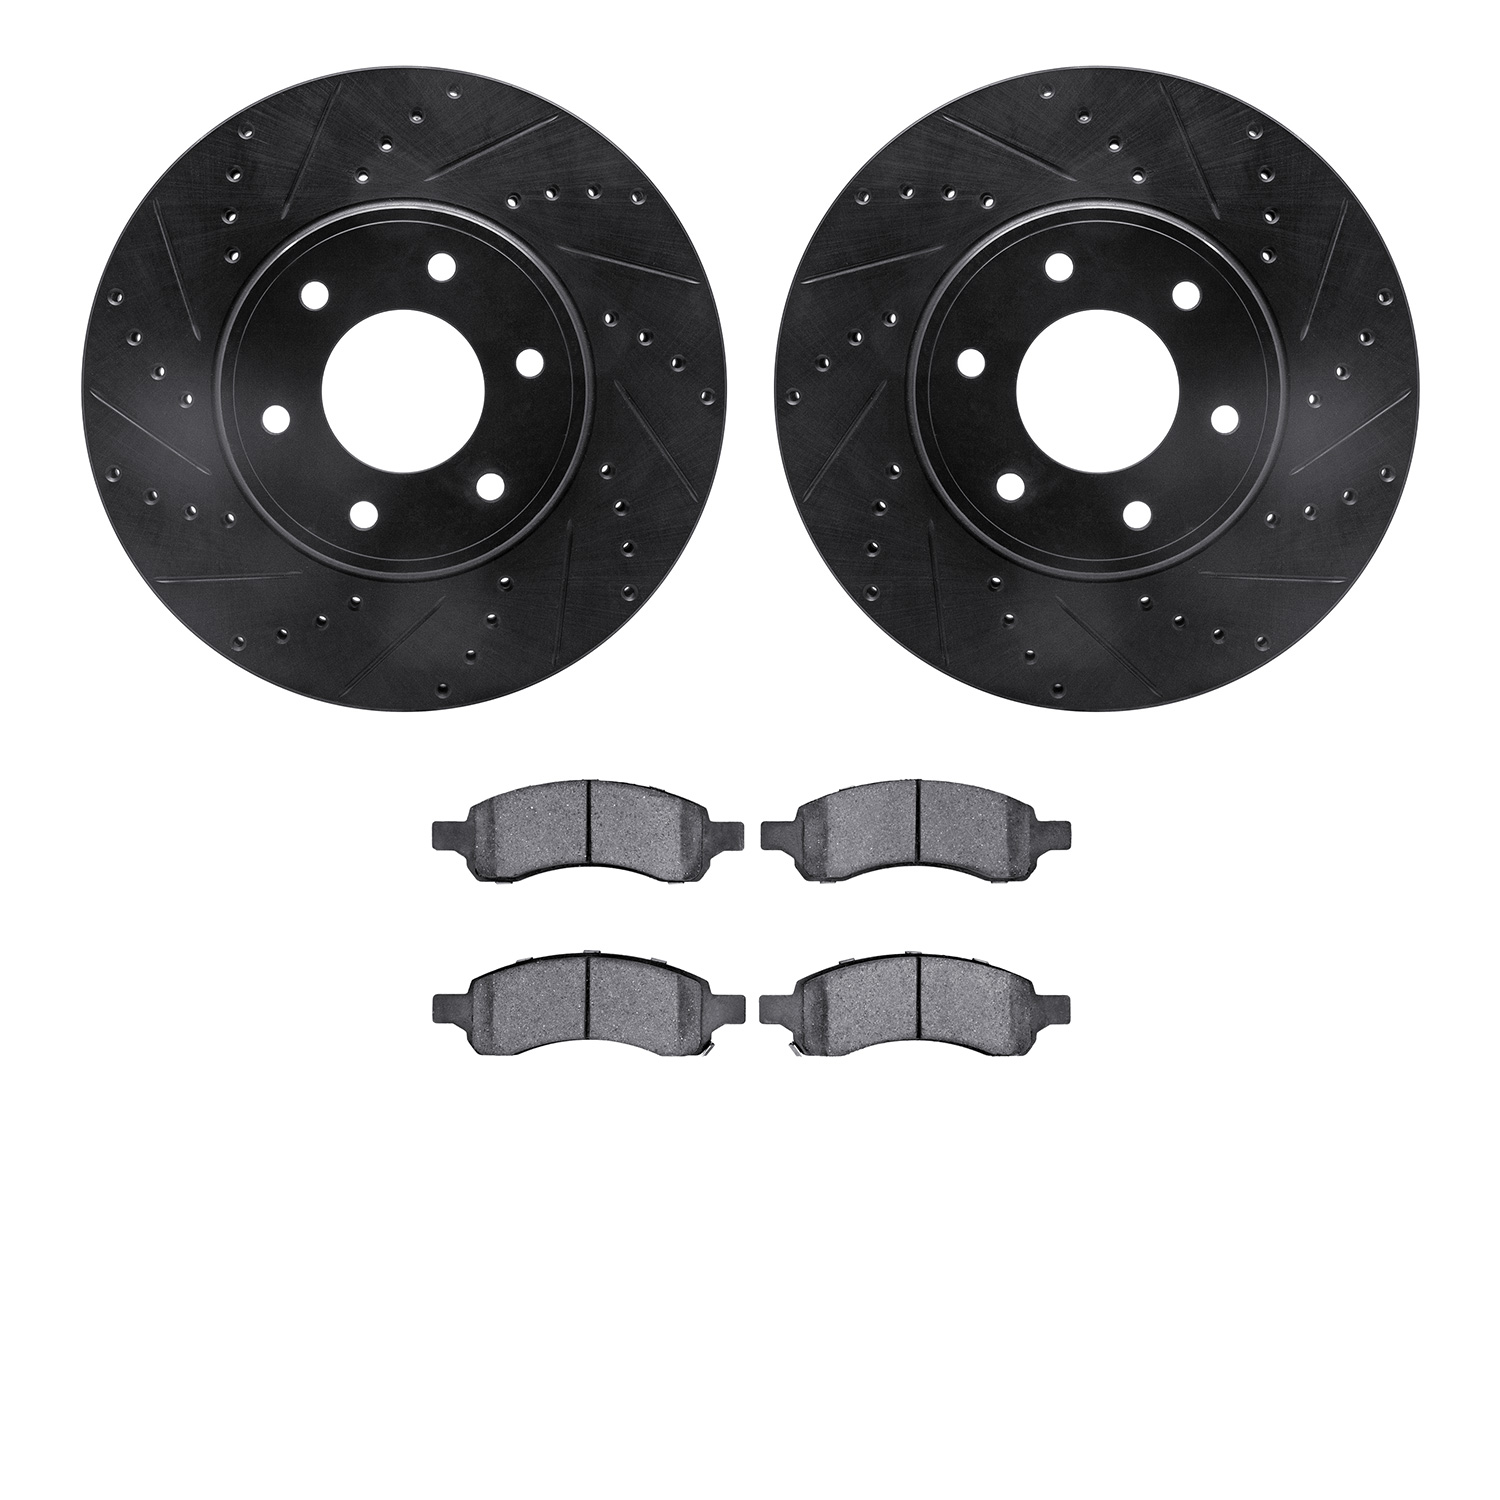 Drilled/Slotted Brake Rotors with Ultimate-Duty Brake Pads Kit